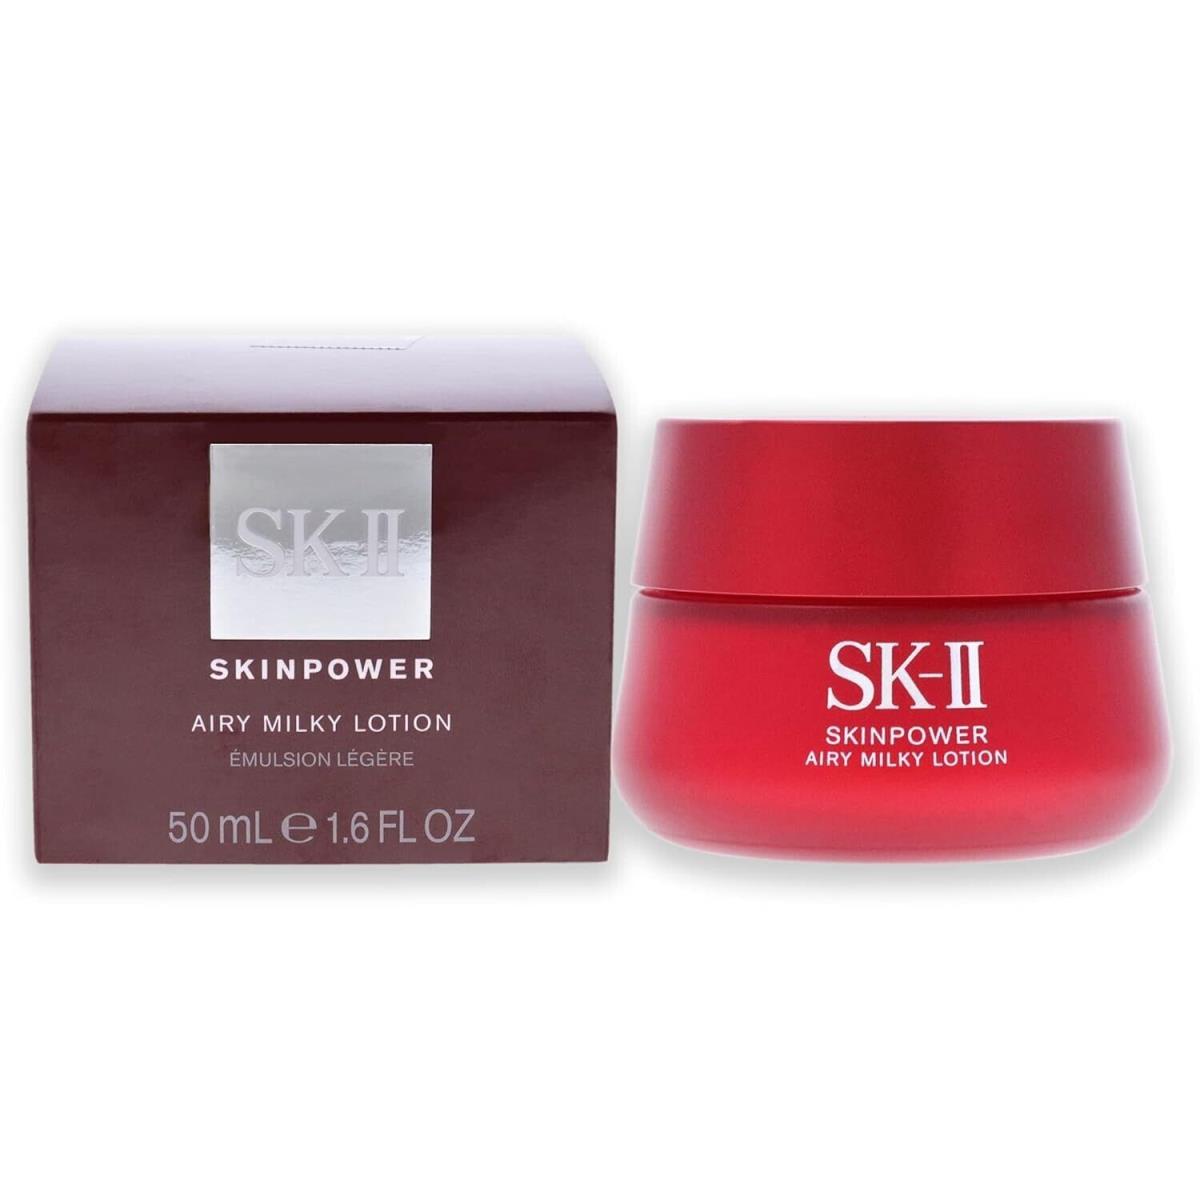 Sk-ii Airy Milky Lotion - Full Size 1.6oz/50ml